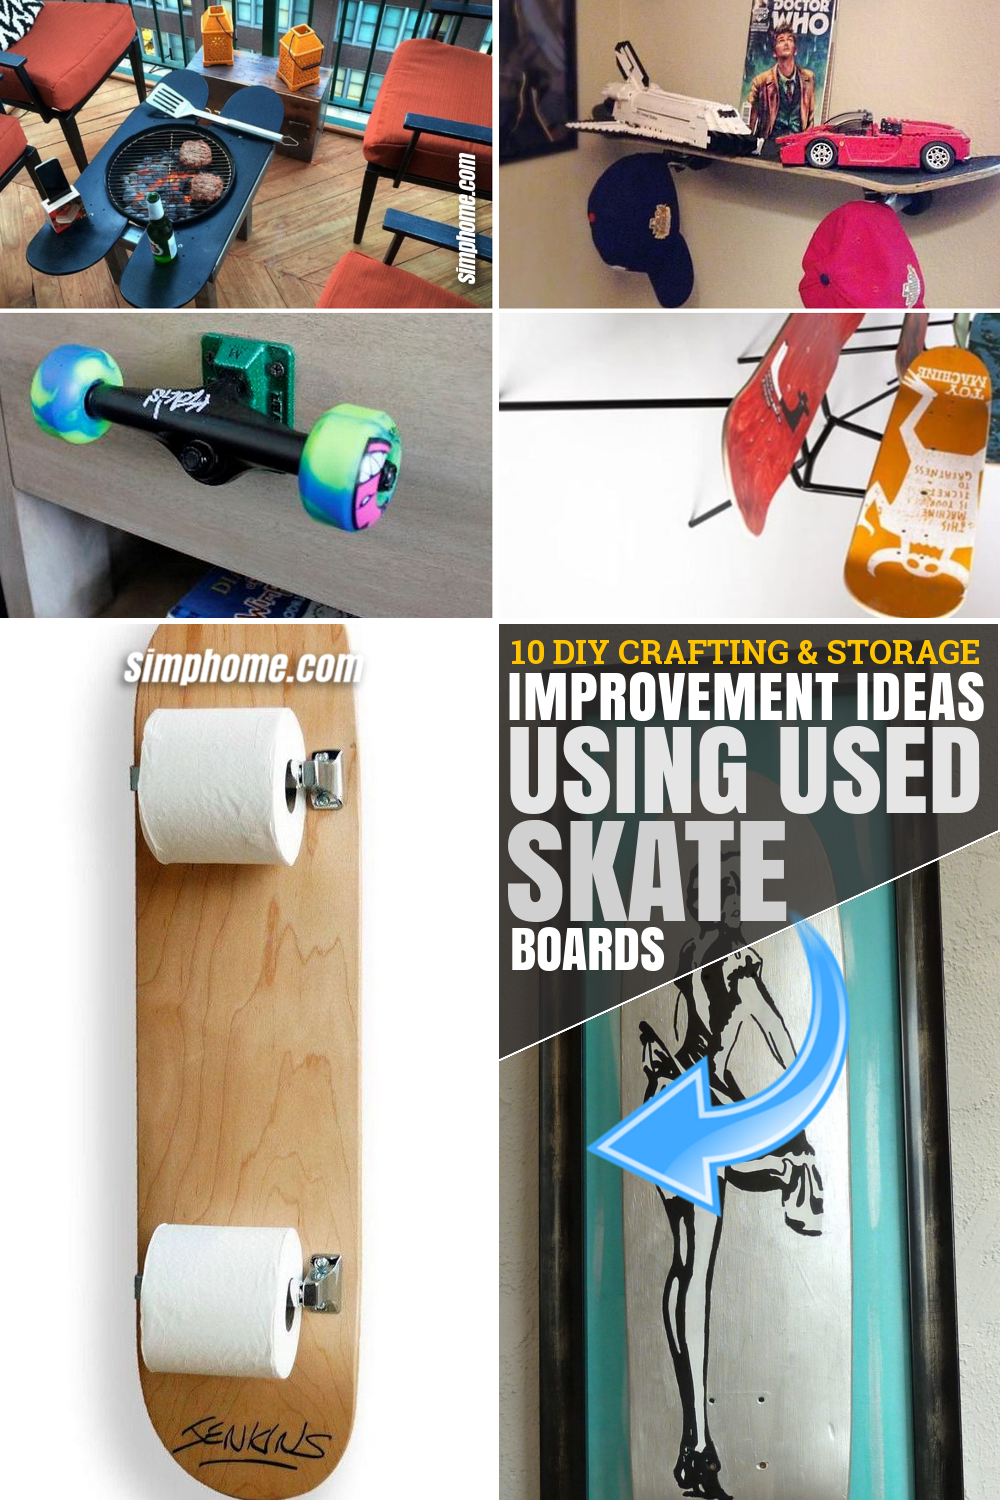 SIMPHOME.COM 10 DIY Crafting and Storage Improvement Ideas Using Used Skateboards Pinterest Featured Image